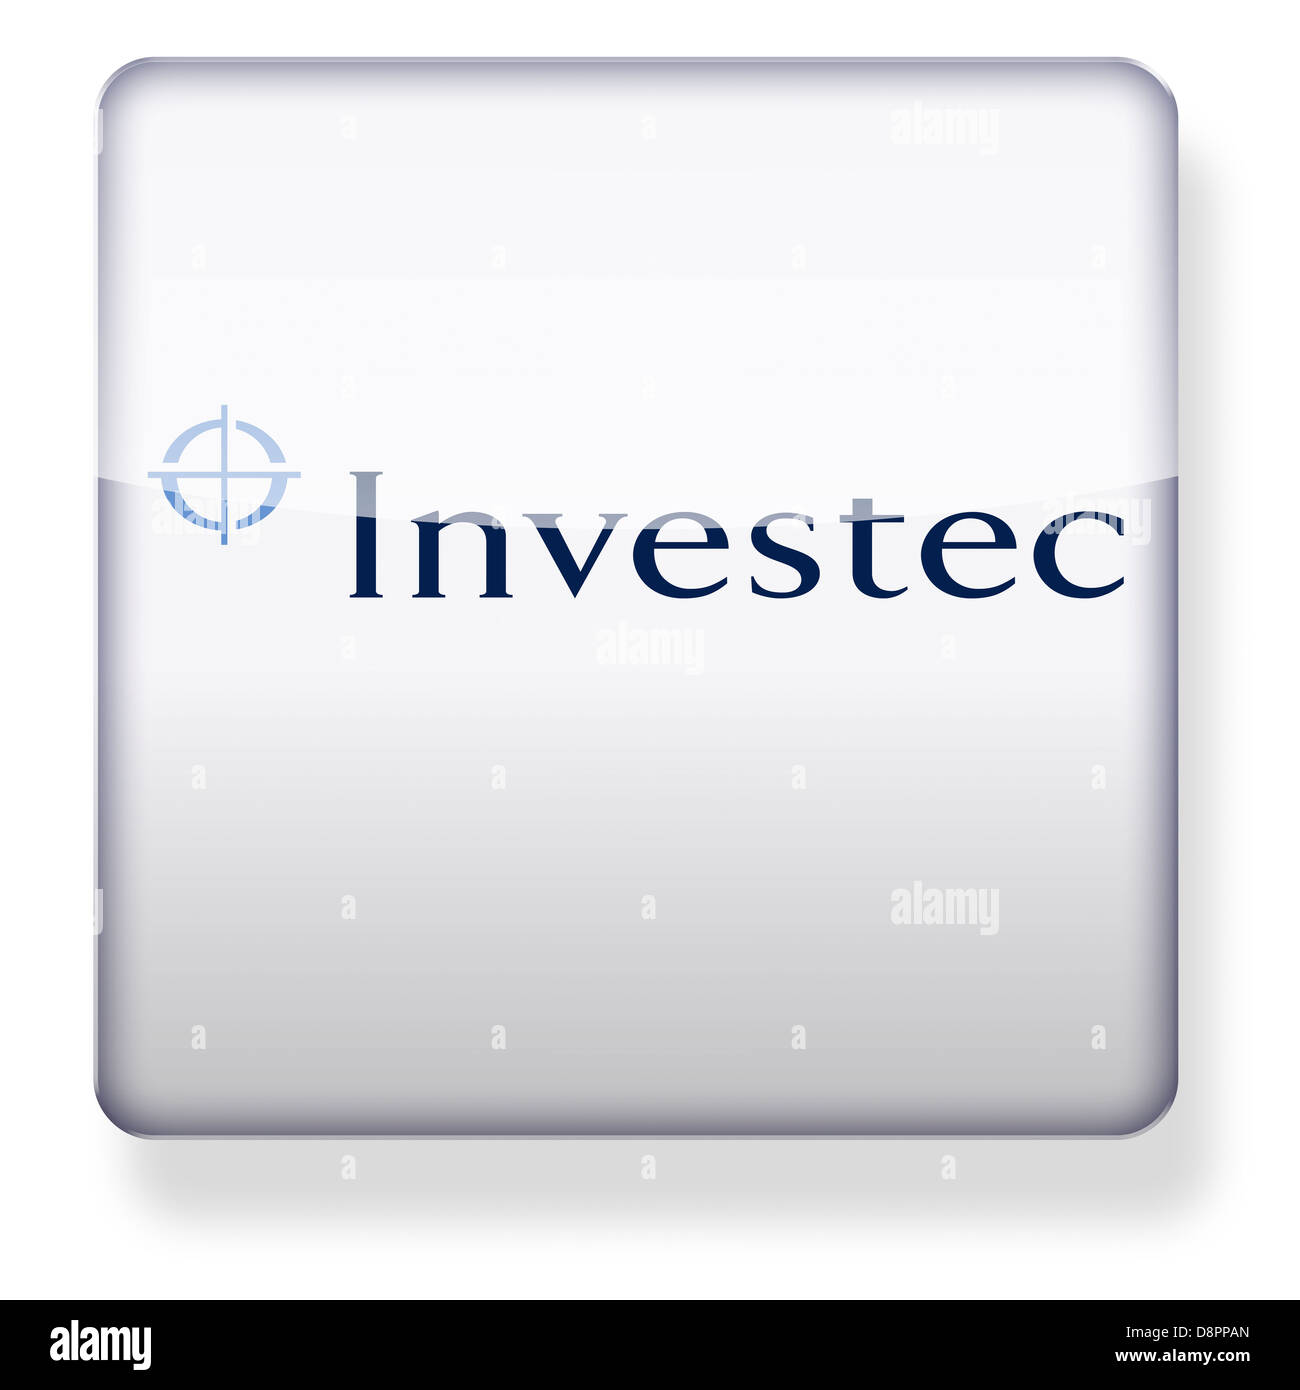 Investec bank logo as an app icon. Clipping path included. Stock Photo